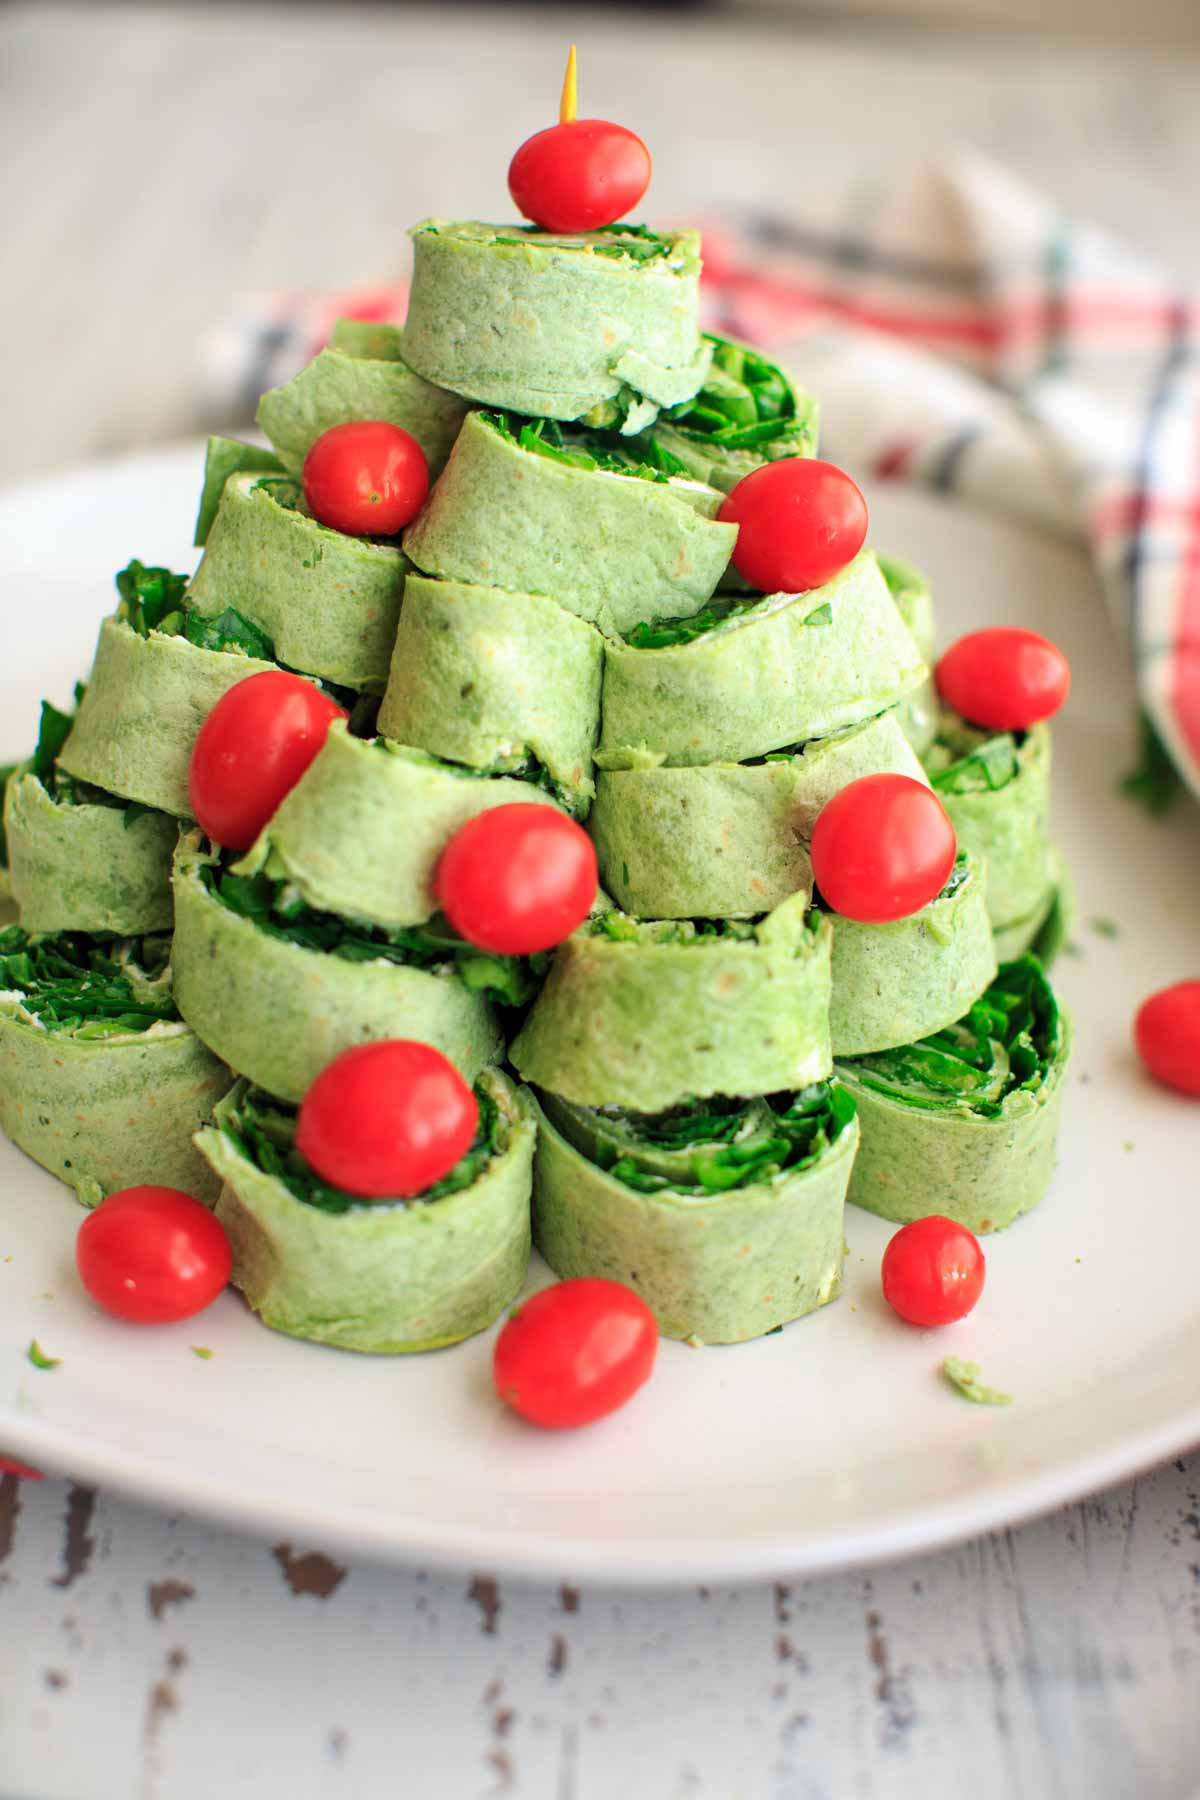 green spinach tortilla pinwheels stacked to make a christmas tree with tomatoes for ornaments